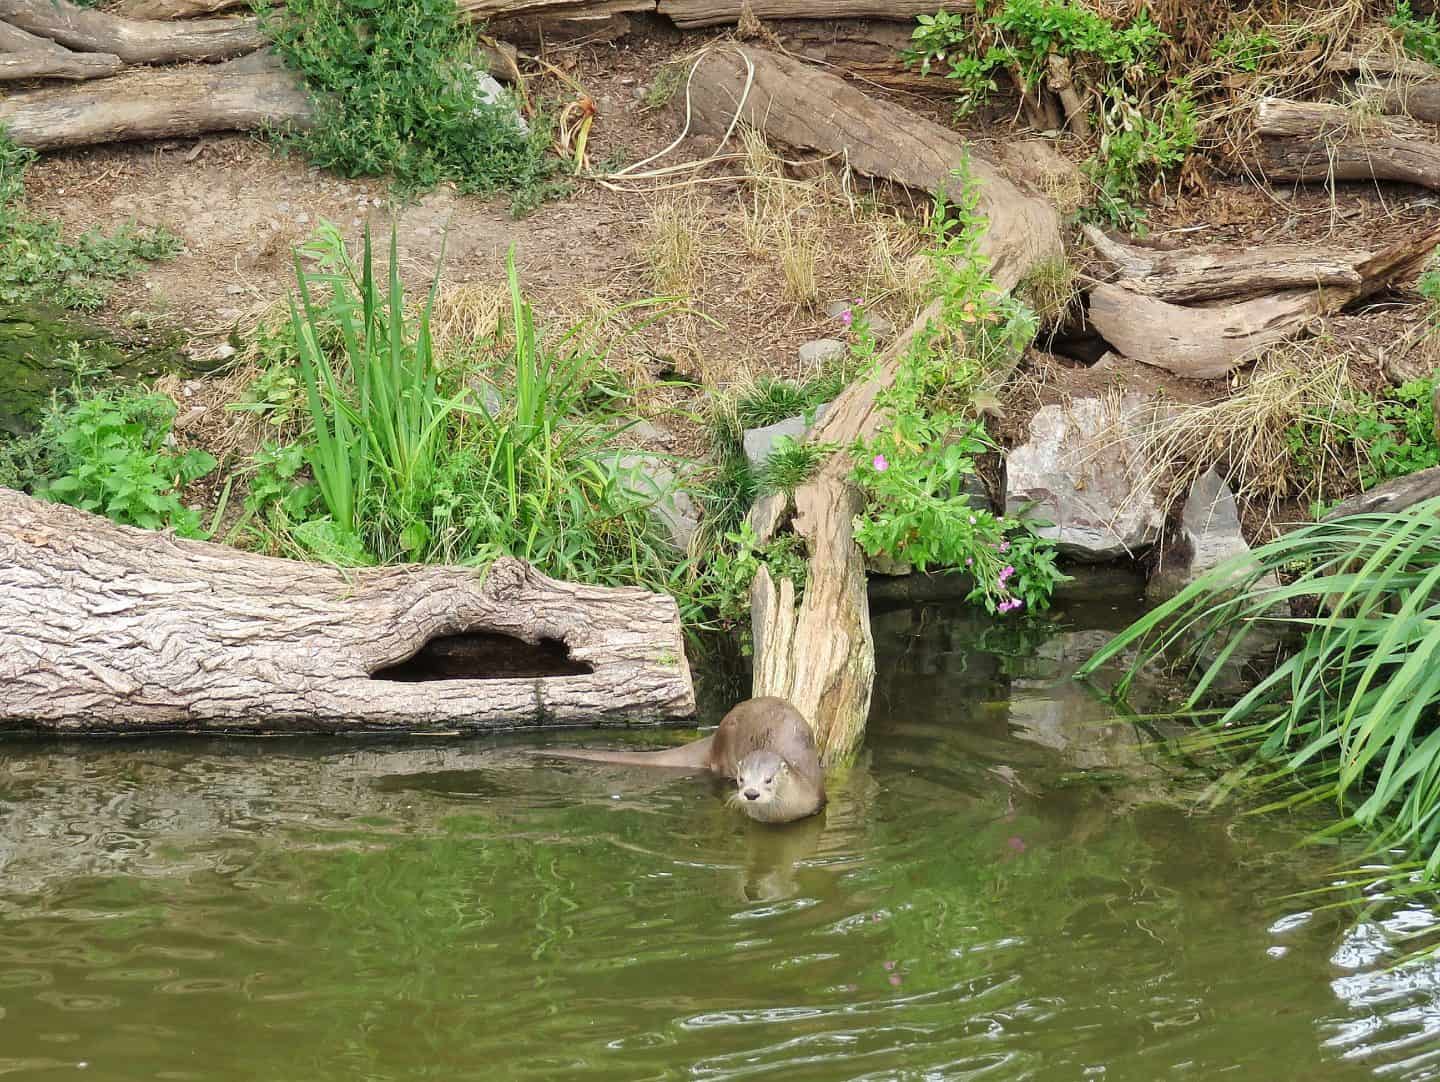 Otter in small pond